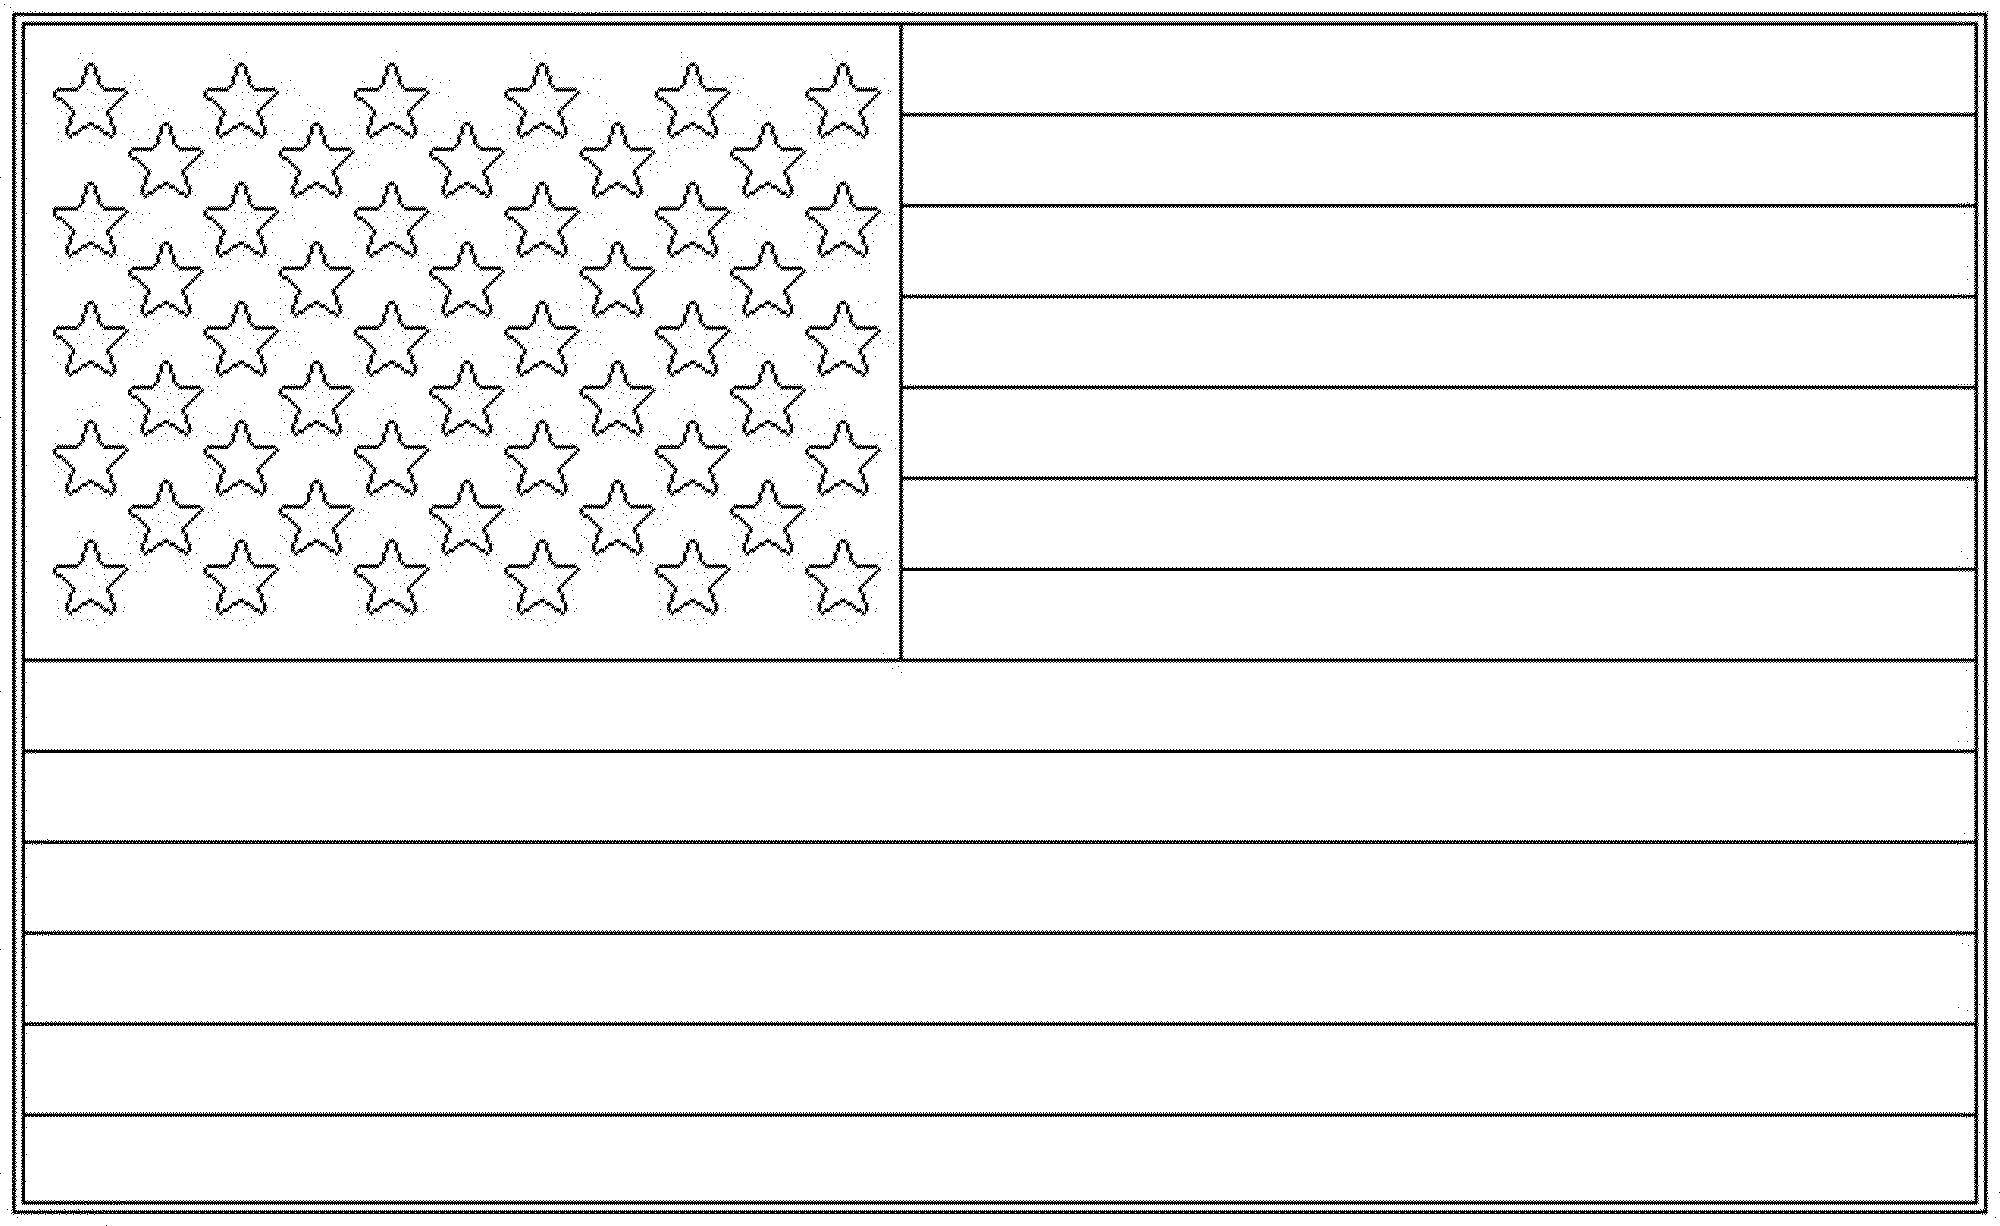 Coloring American flag. Category Flags. Tags:  Flag.